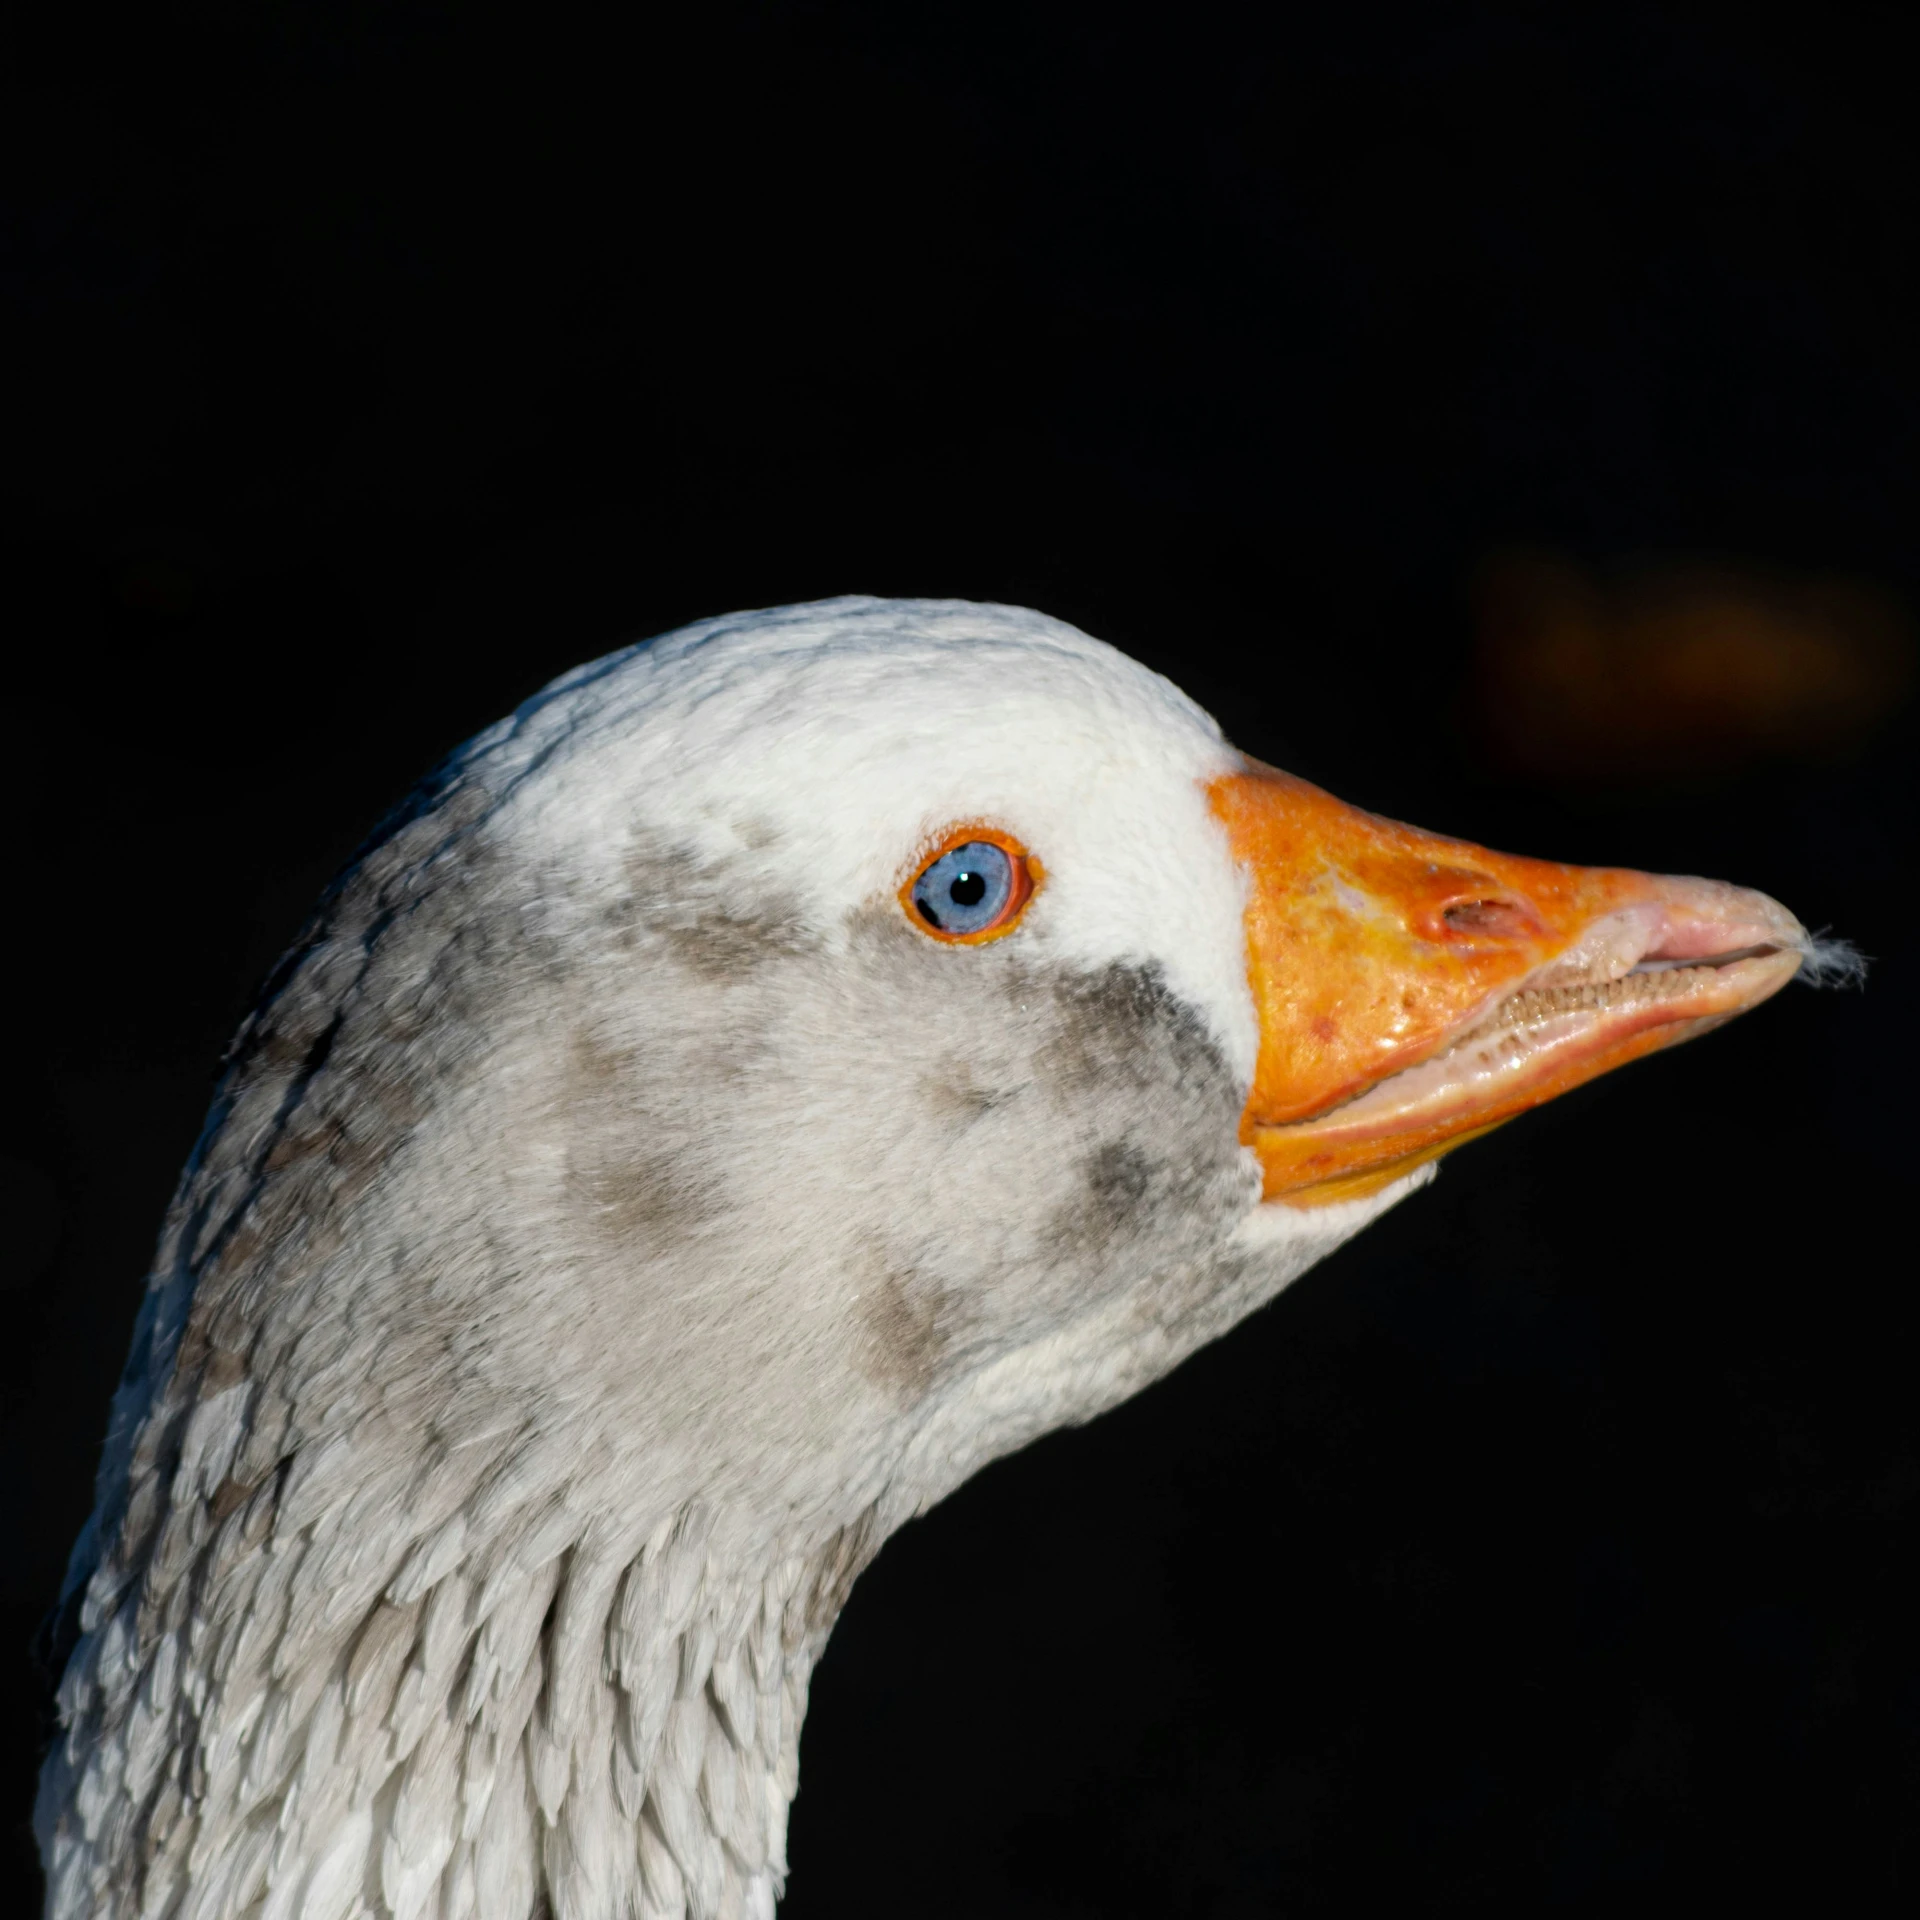 a duck with orange beak and long, thin bill